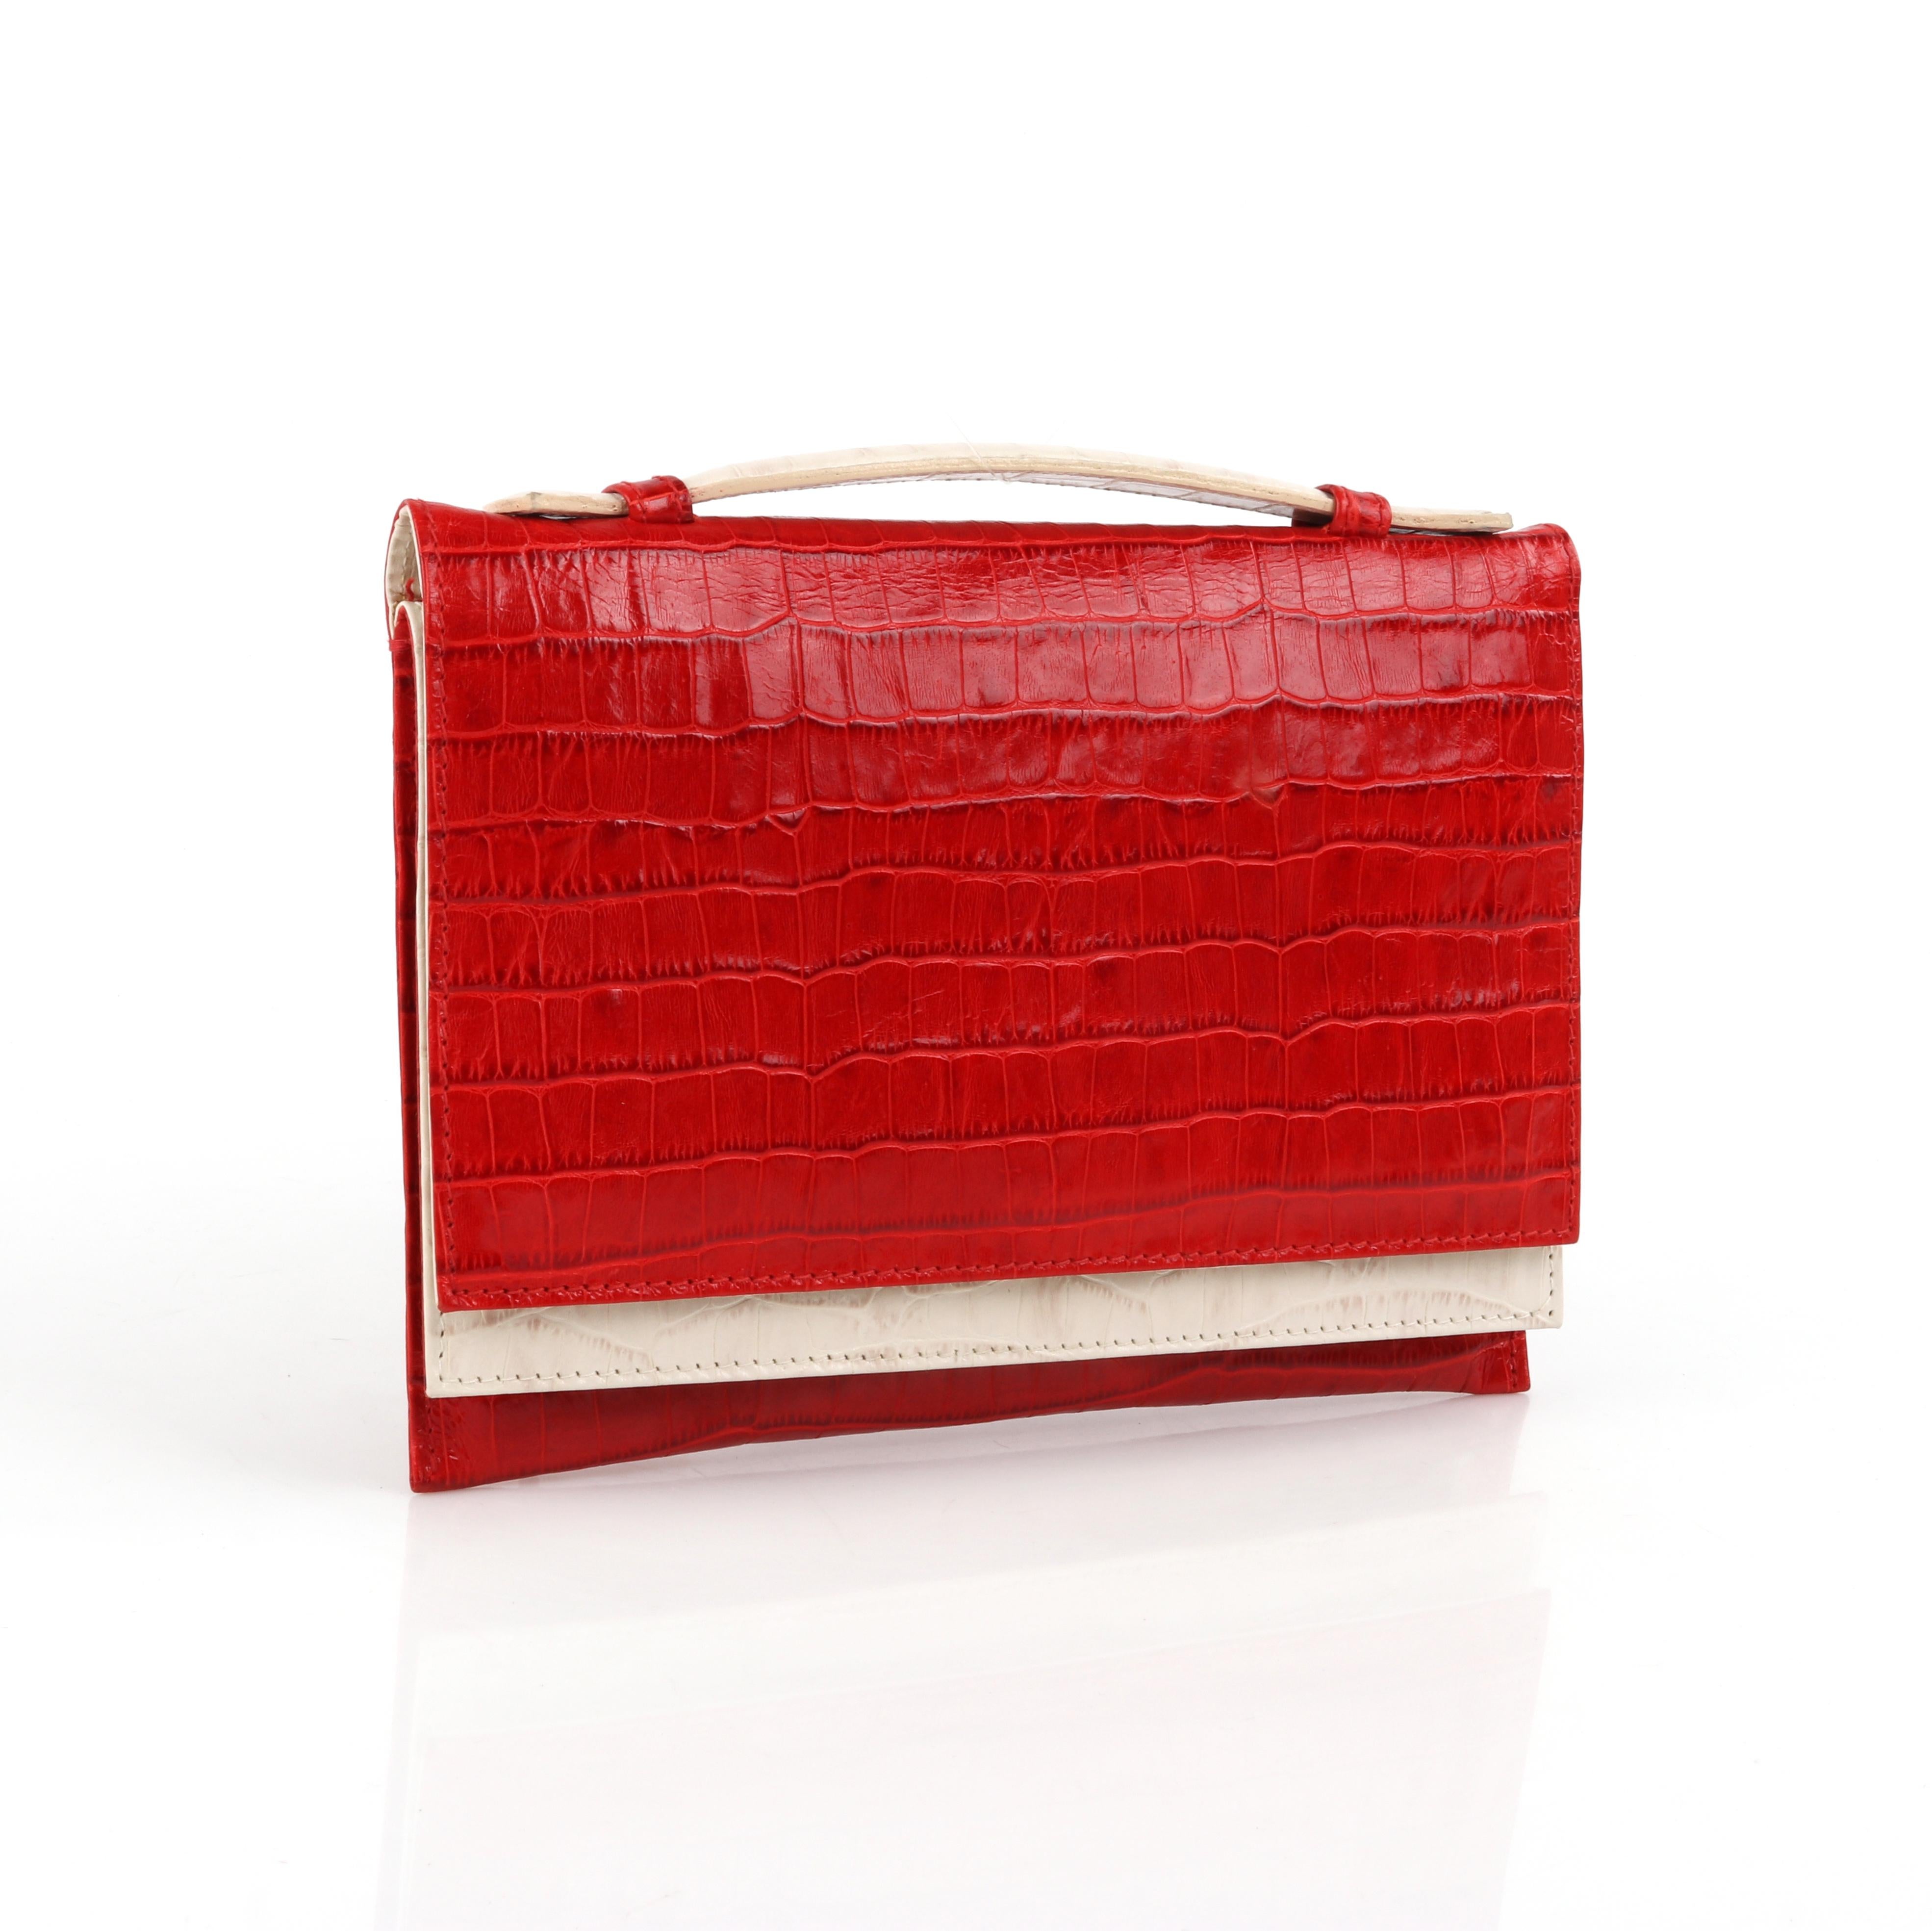 PONTINE PAUS c. 2008 Red Ivory Crocodile Leather Flap Fold Clutch Purse Bag RARE

Brand / Manufacturer: Pontine Paus
Circa: 2008
Designer: Pontine Paus
Style: Flap Clutch
Color(s): Red, Ivory
Lined: Yes
Unmarked Fabric (feel of): Crocodile Leather